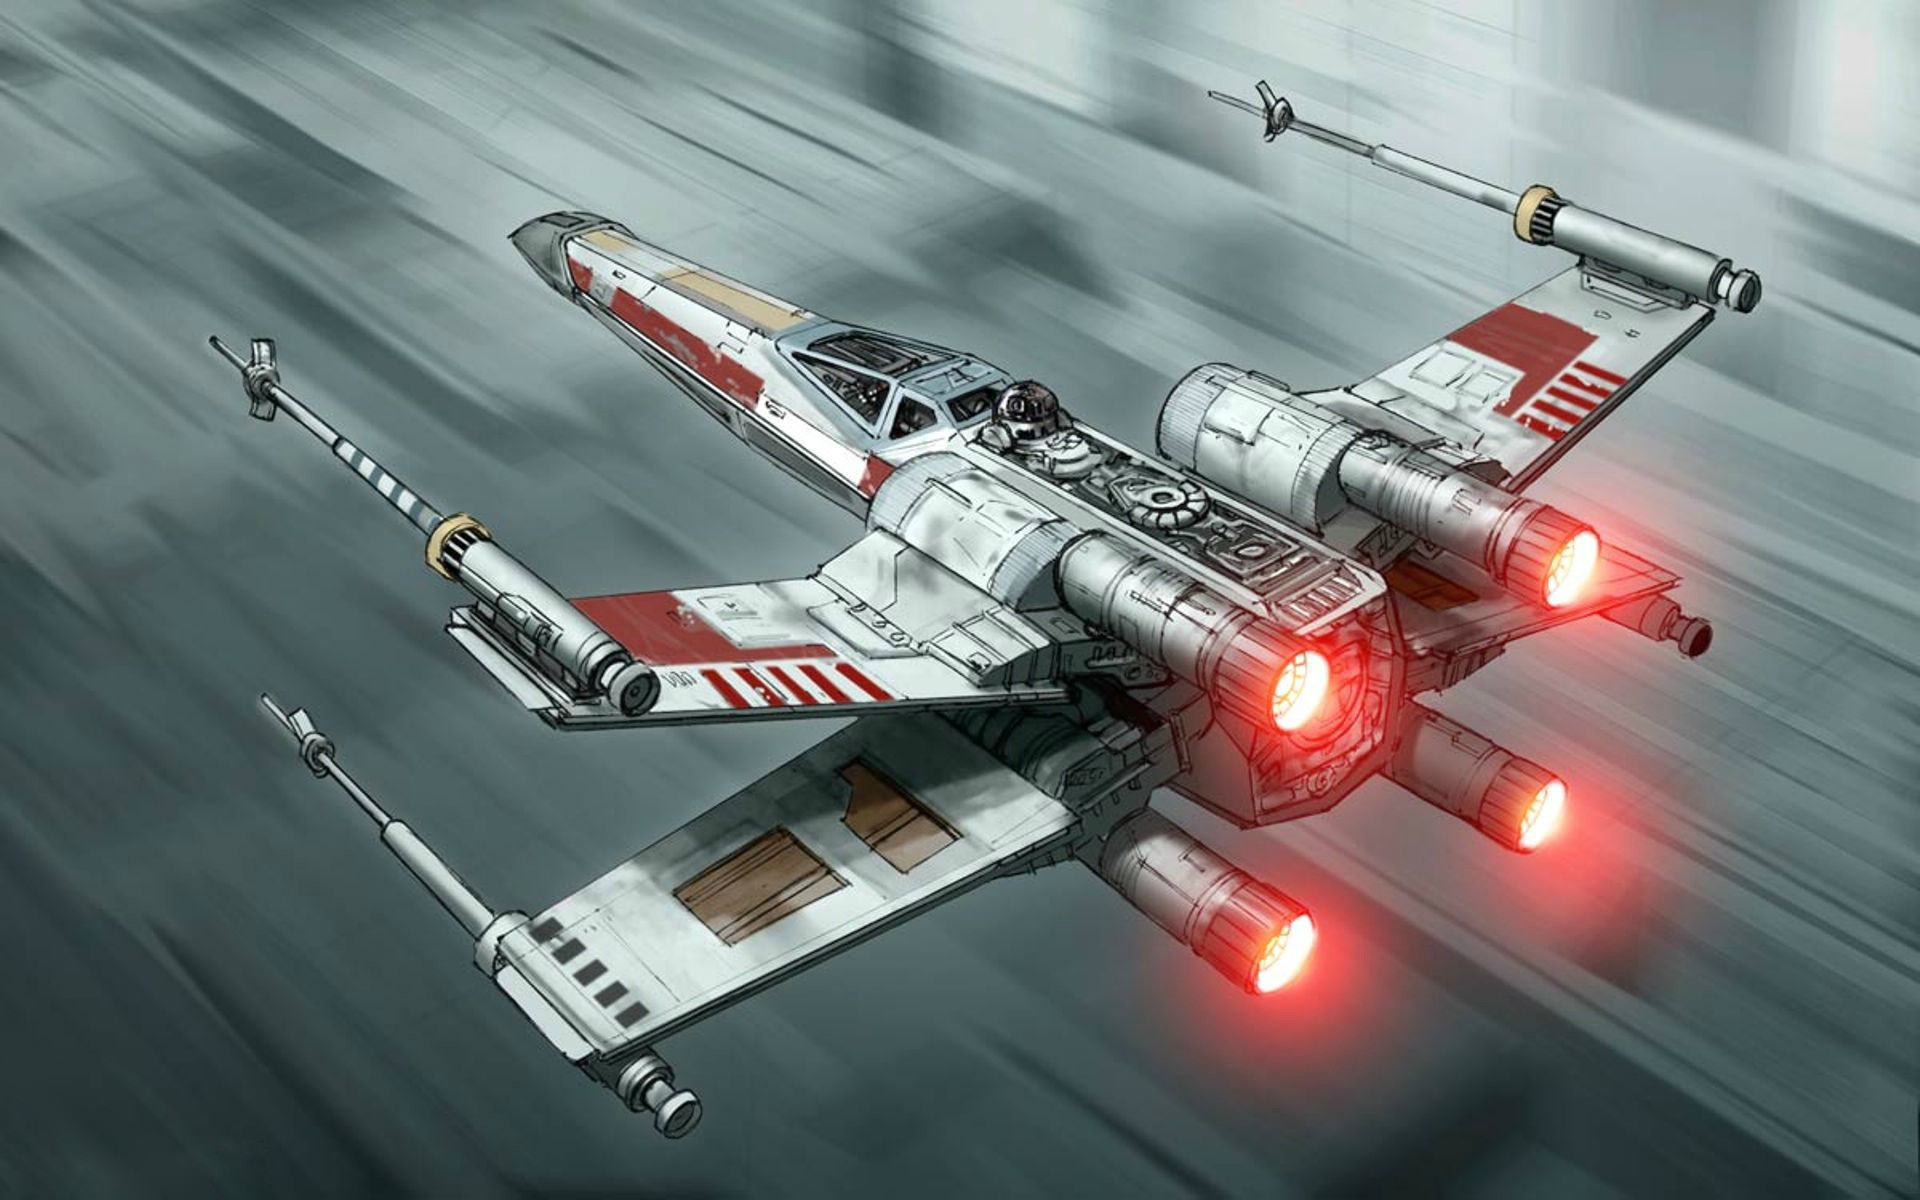 Download hd wallpapers of 28337fantasy Art Star Wars Xwing Free  download High Quality and Widescr  Star wars spaceships Star wars  images Star wars painting